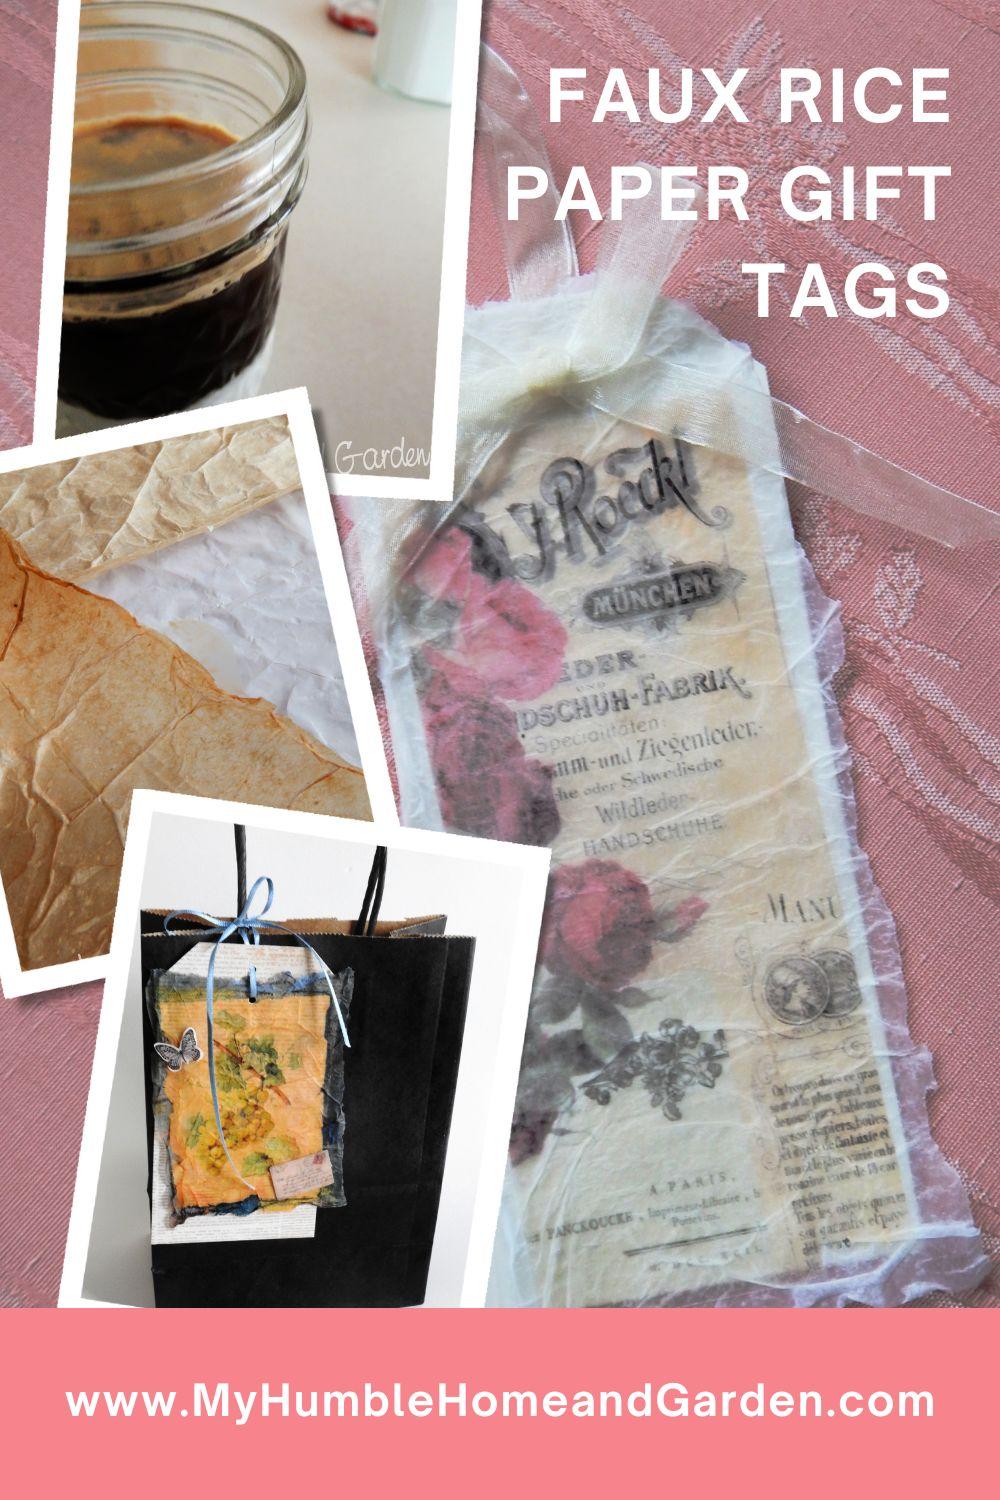 How To: Print on Rice or Tissue Paper!!!